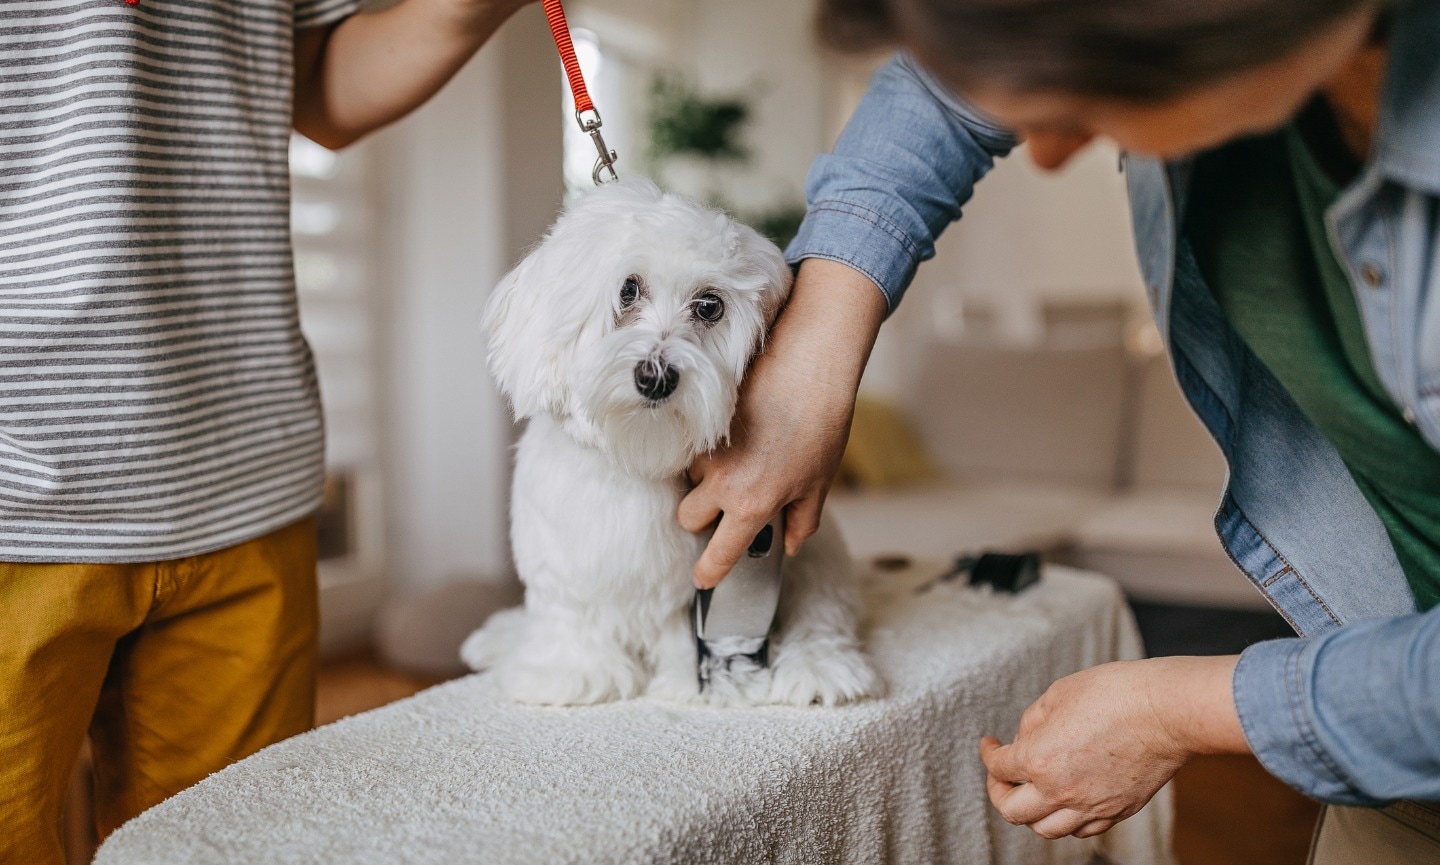 Grooming A Dog With Clippers How To Give A Dog A Haircut At Home Bechewy